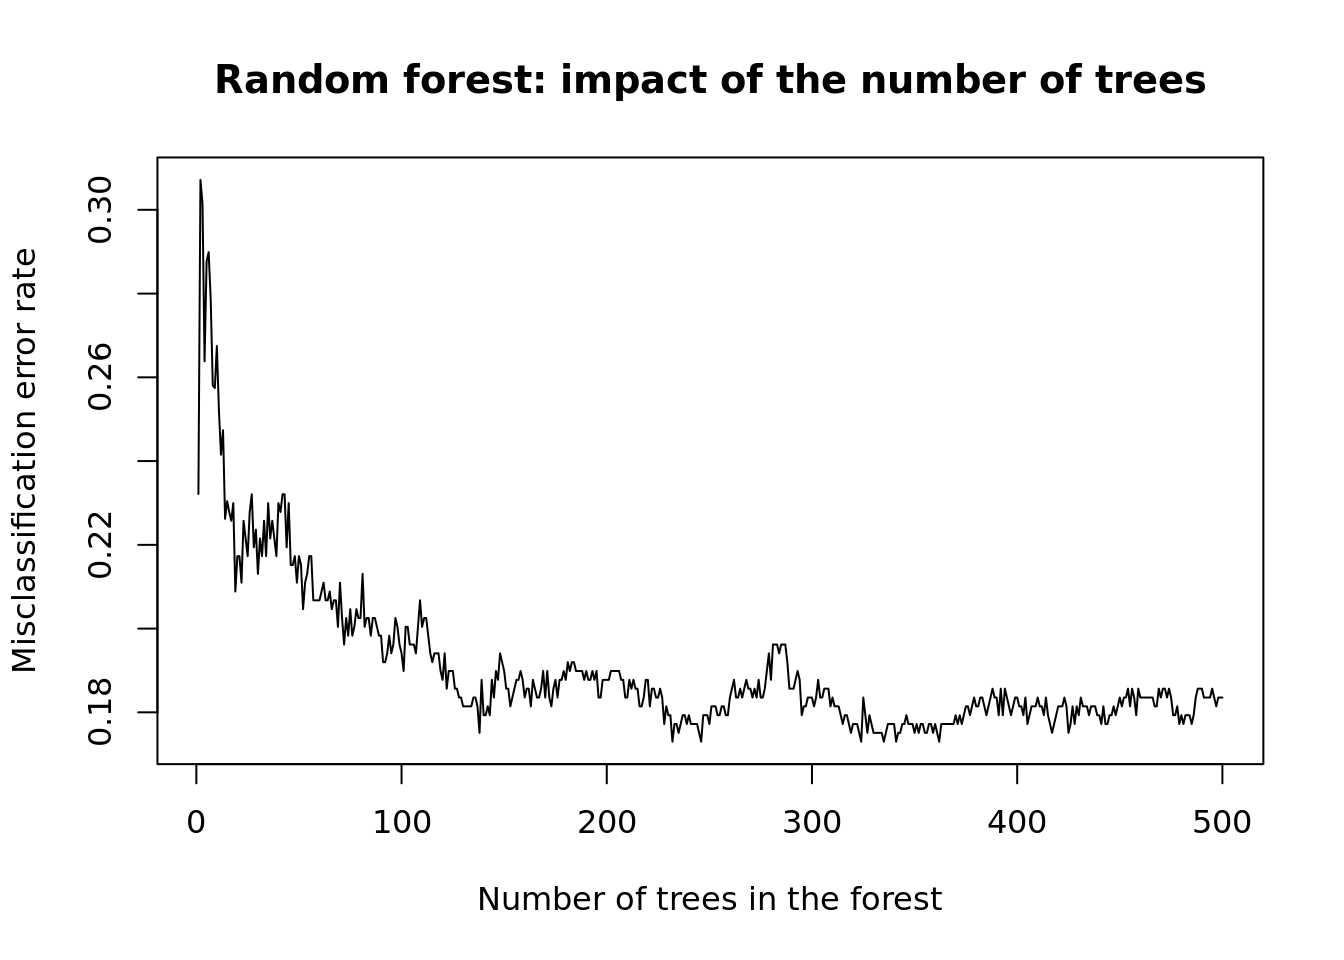 Random forest: impact of the number of tree on the misclassification error rate (MER)